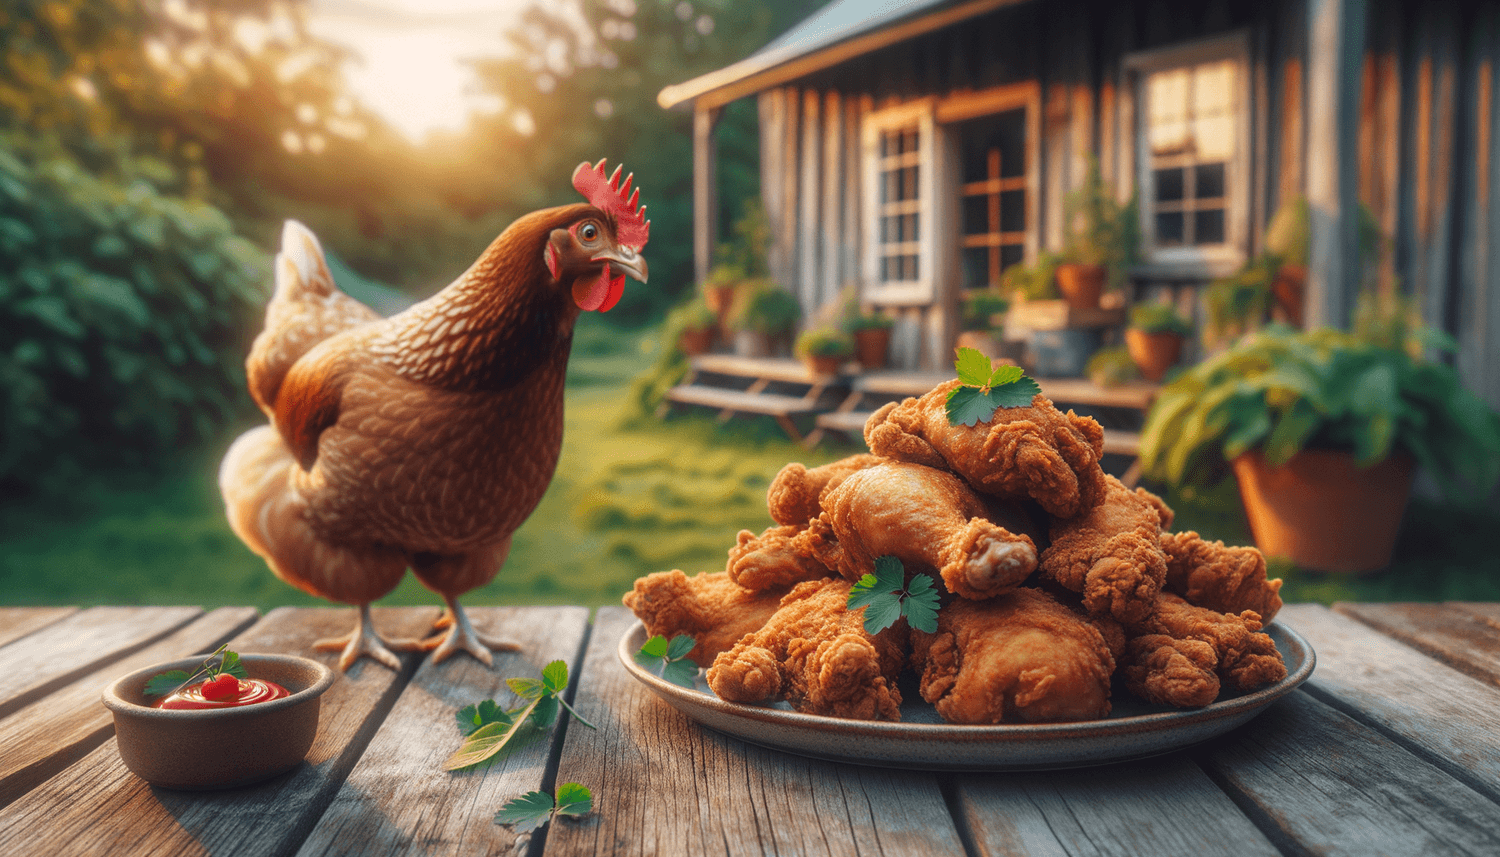 Can Chickens Eat Fried Chicken?